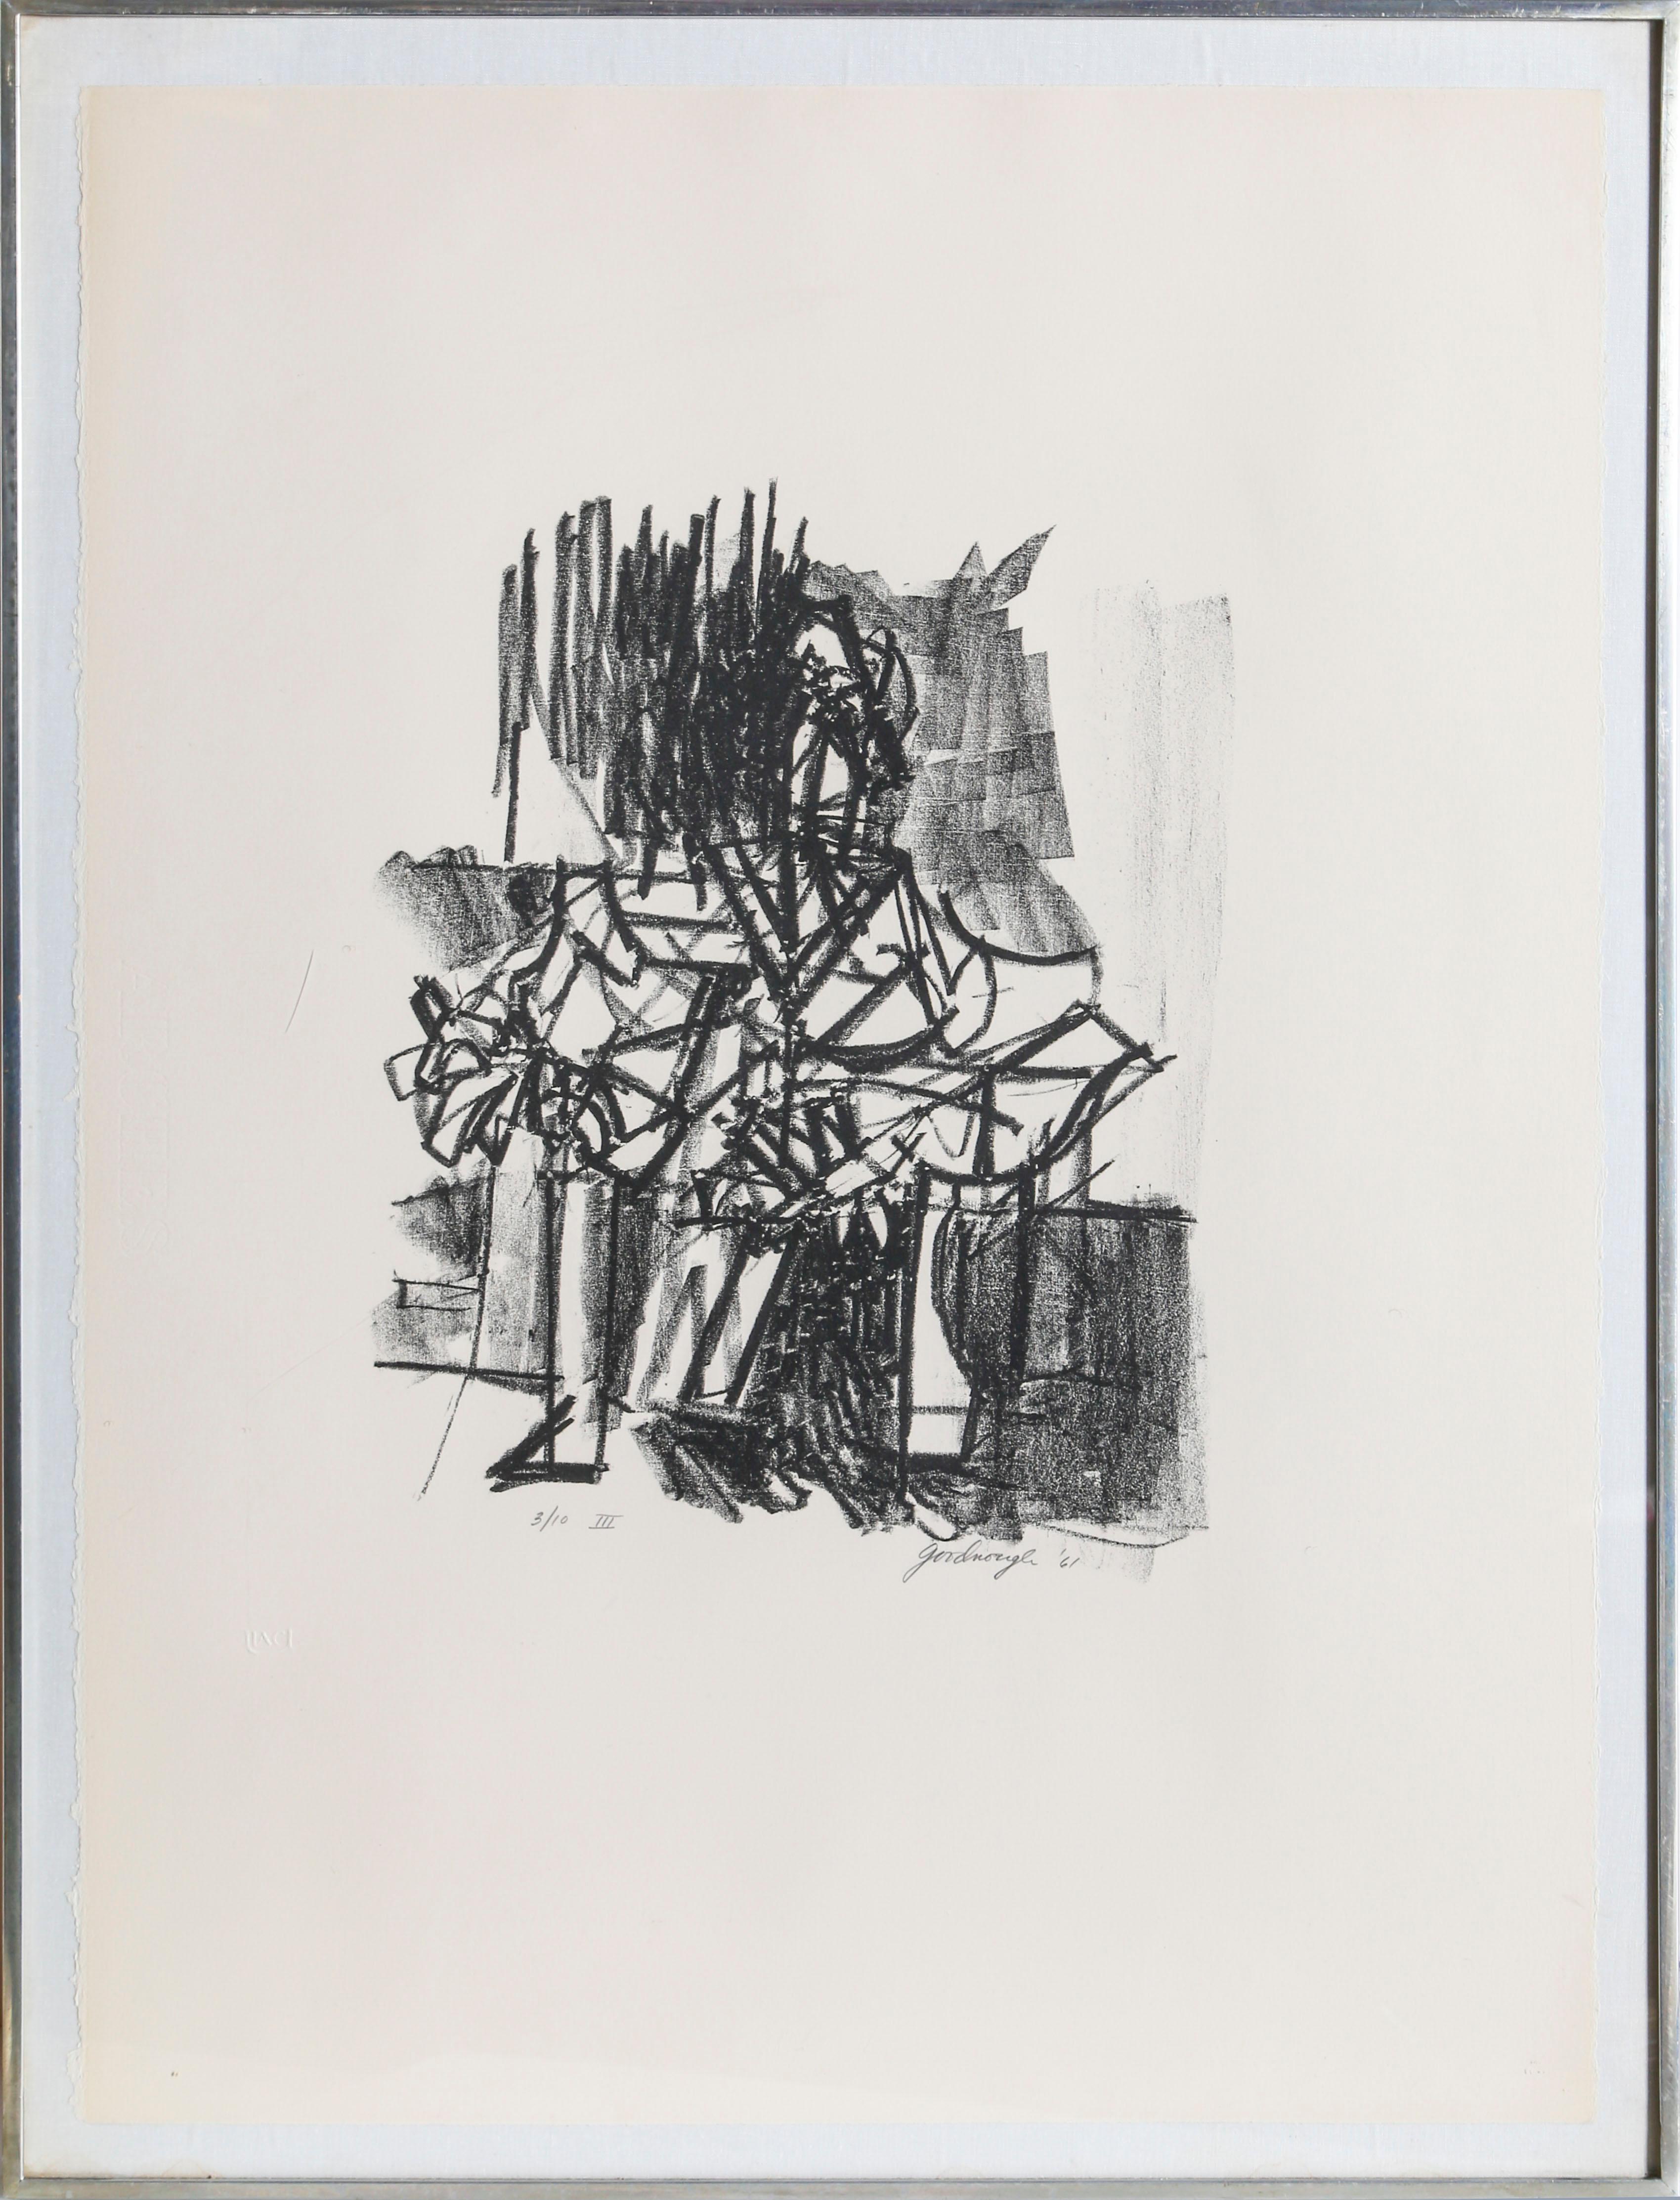 Works from this bold abstract series by Robert Goodnough have been featured in collections at the Metropolitan Museum of Art, the Whitney Museum of Art, the Smithsonian Institution, and the Art Institute of Chicago. Seen through the sketchy haze, a